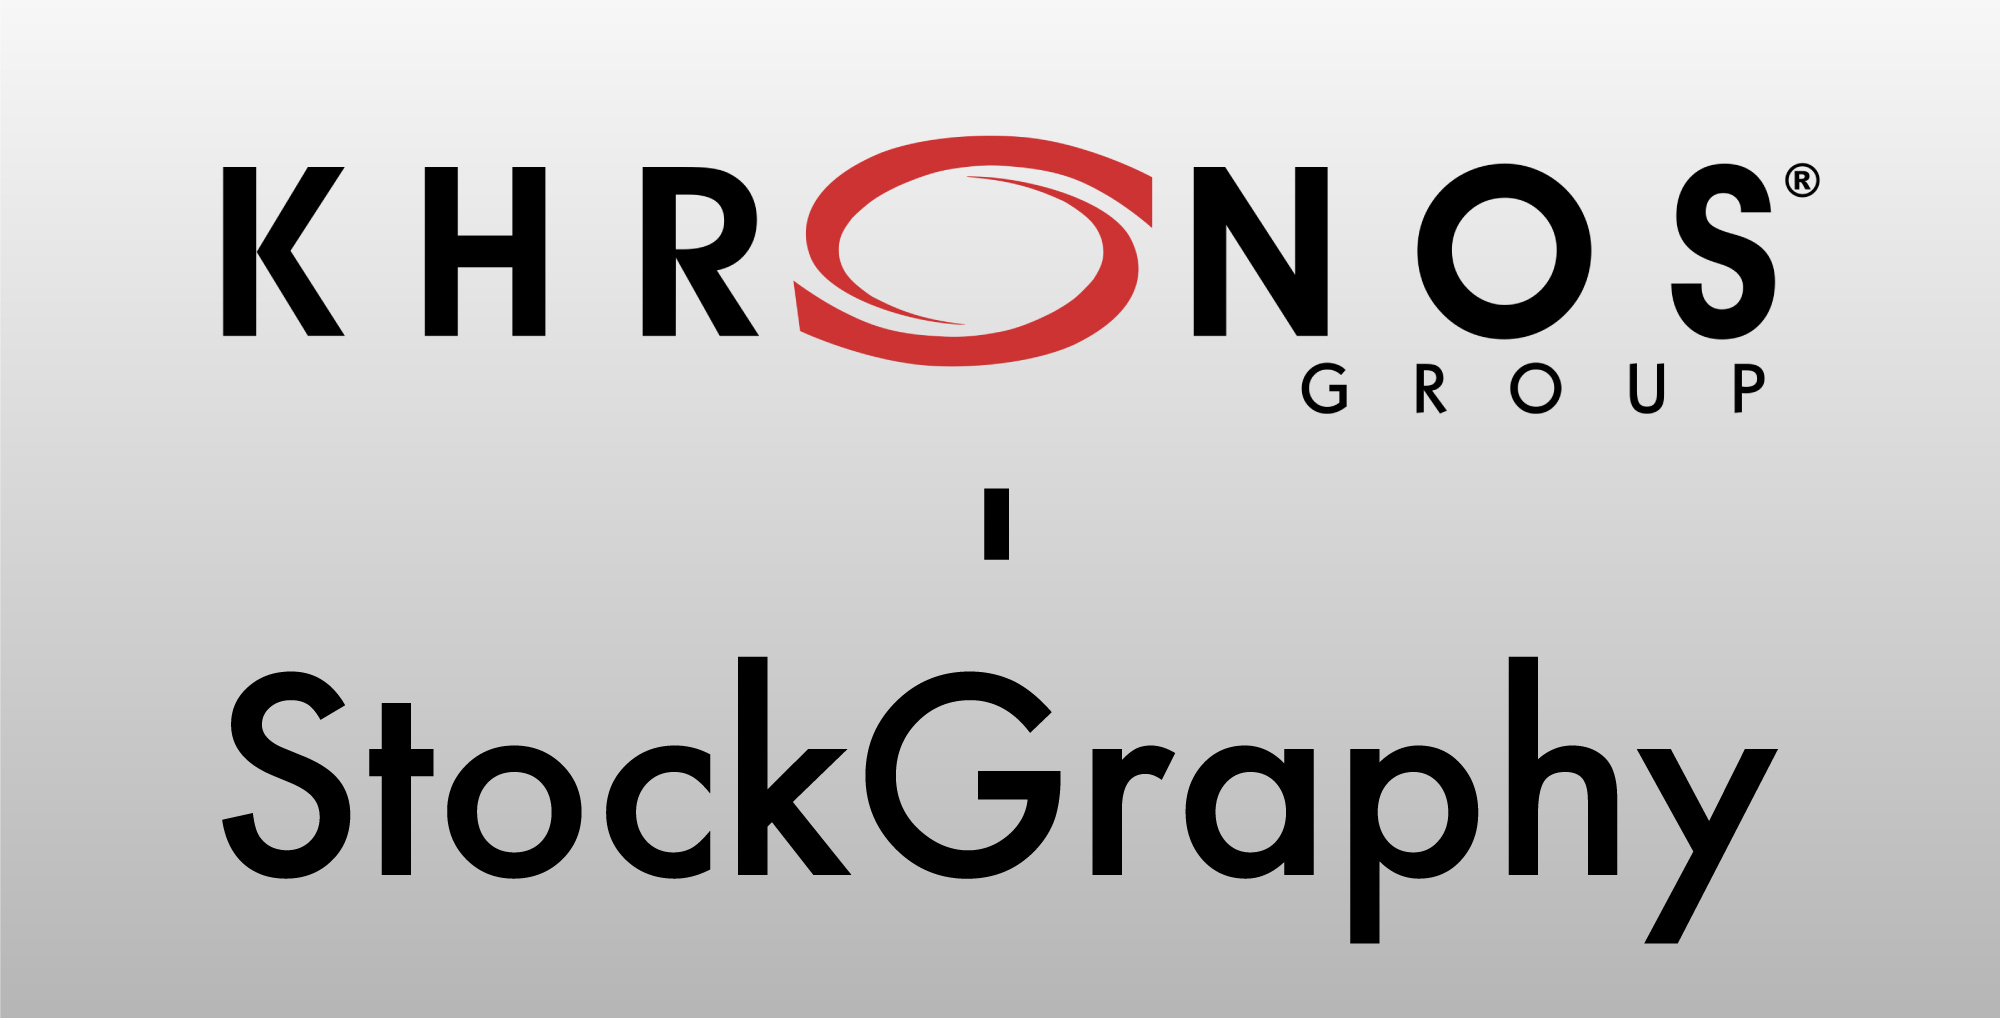 StockGraphy join the Khronos Group that is a consortium of standards for 3D related technologies.